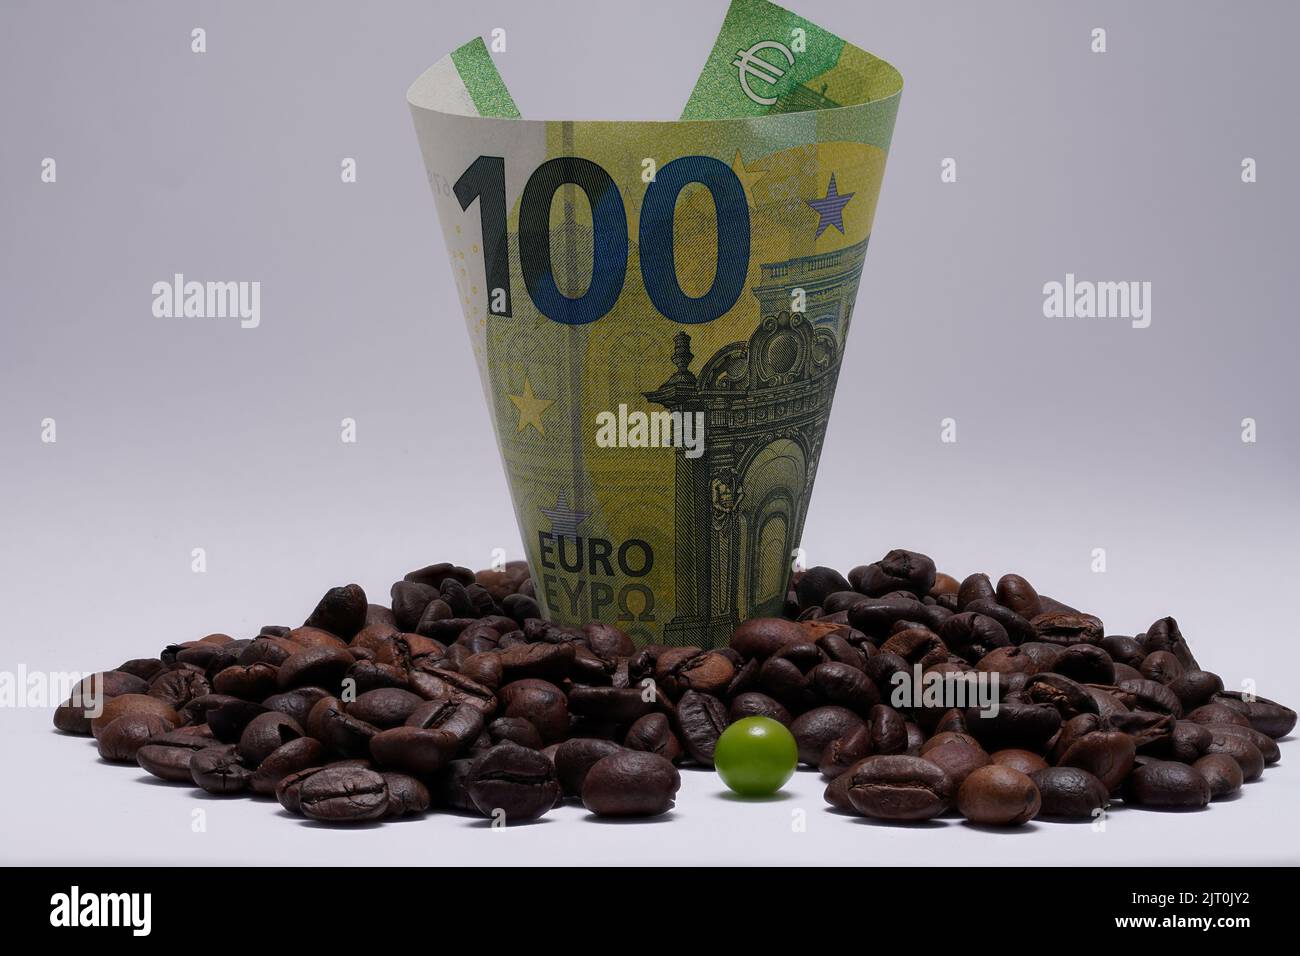 one hundred euros among coffee beans Stock Photo